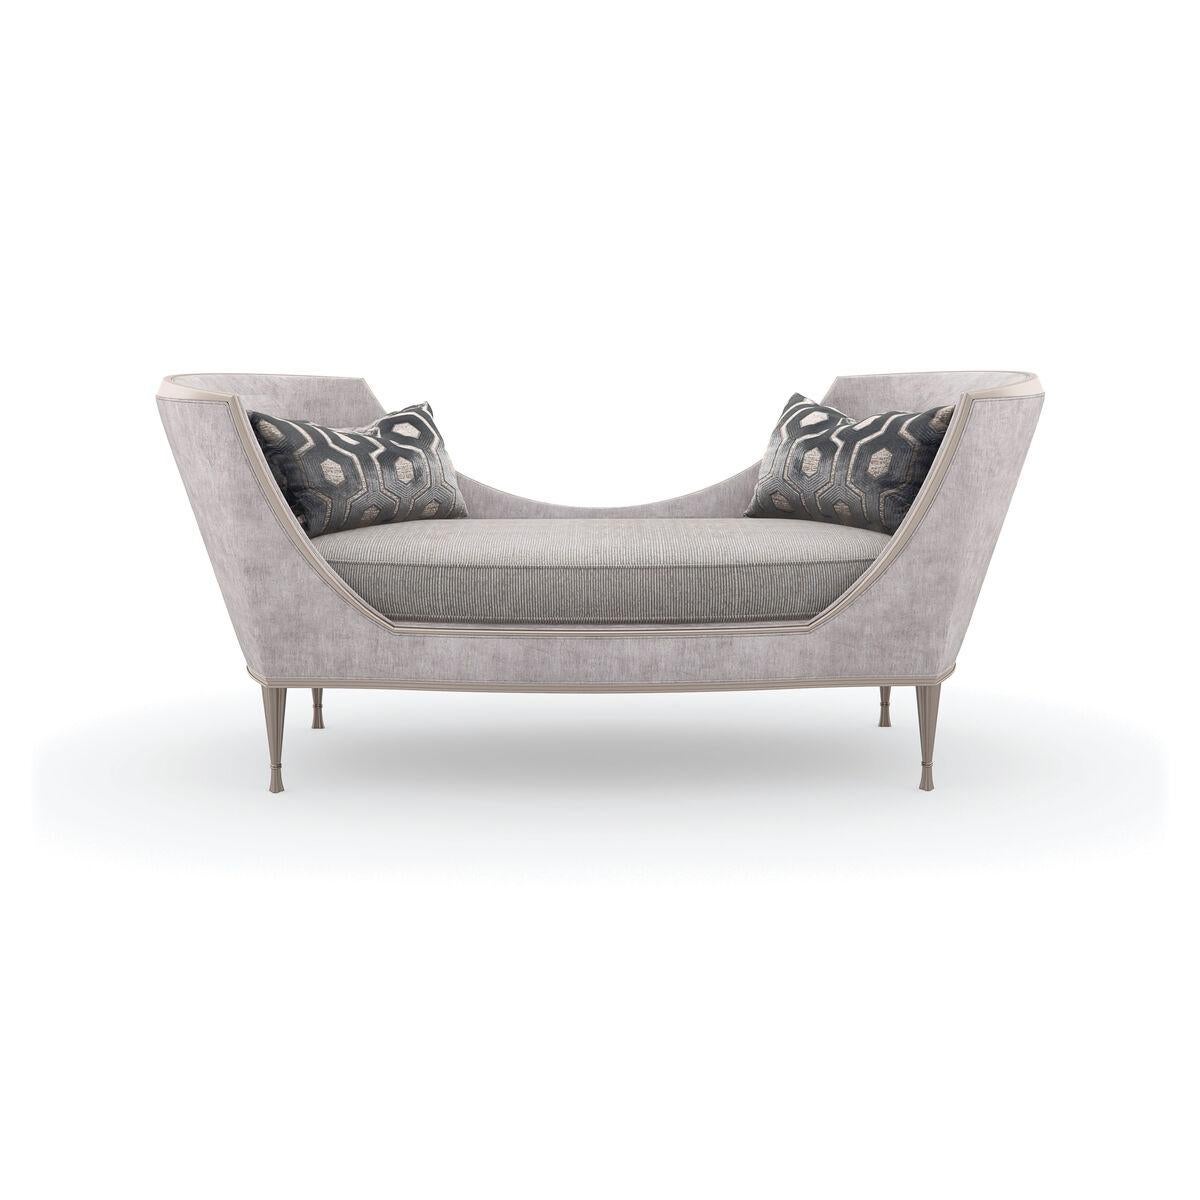 Wrapped in an irresistibly soft chenille, this gracefully curved chaise offers curl-up comfort for one (or two). Its enveloping silhouette features a pinstripe cord seat cushion and rounded shelter arms, artfully accented by a decorative metal rod